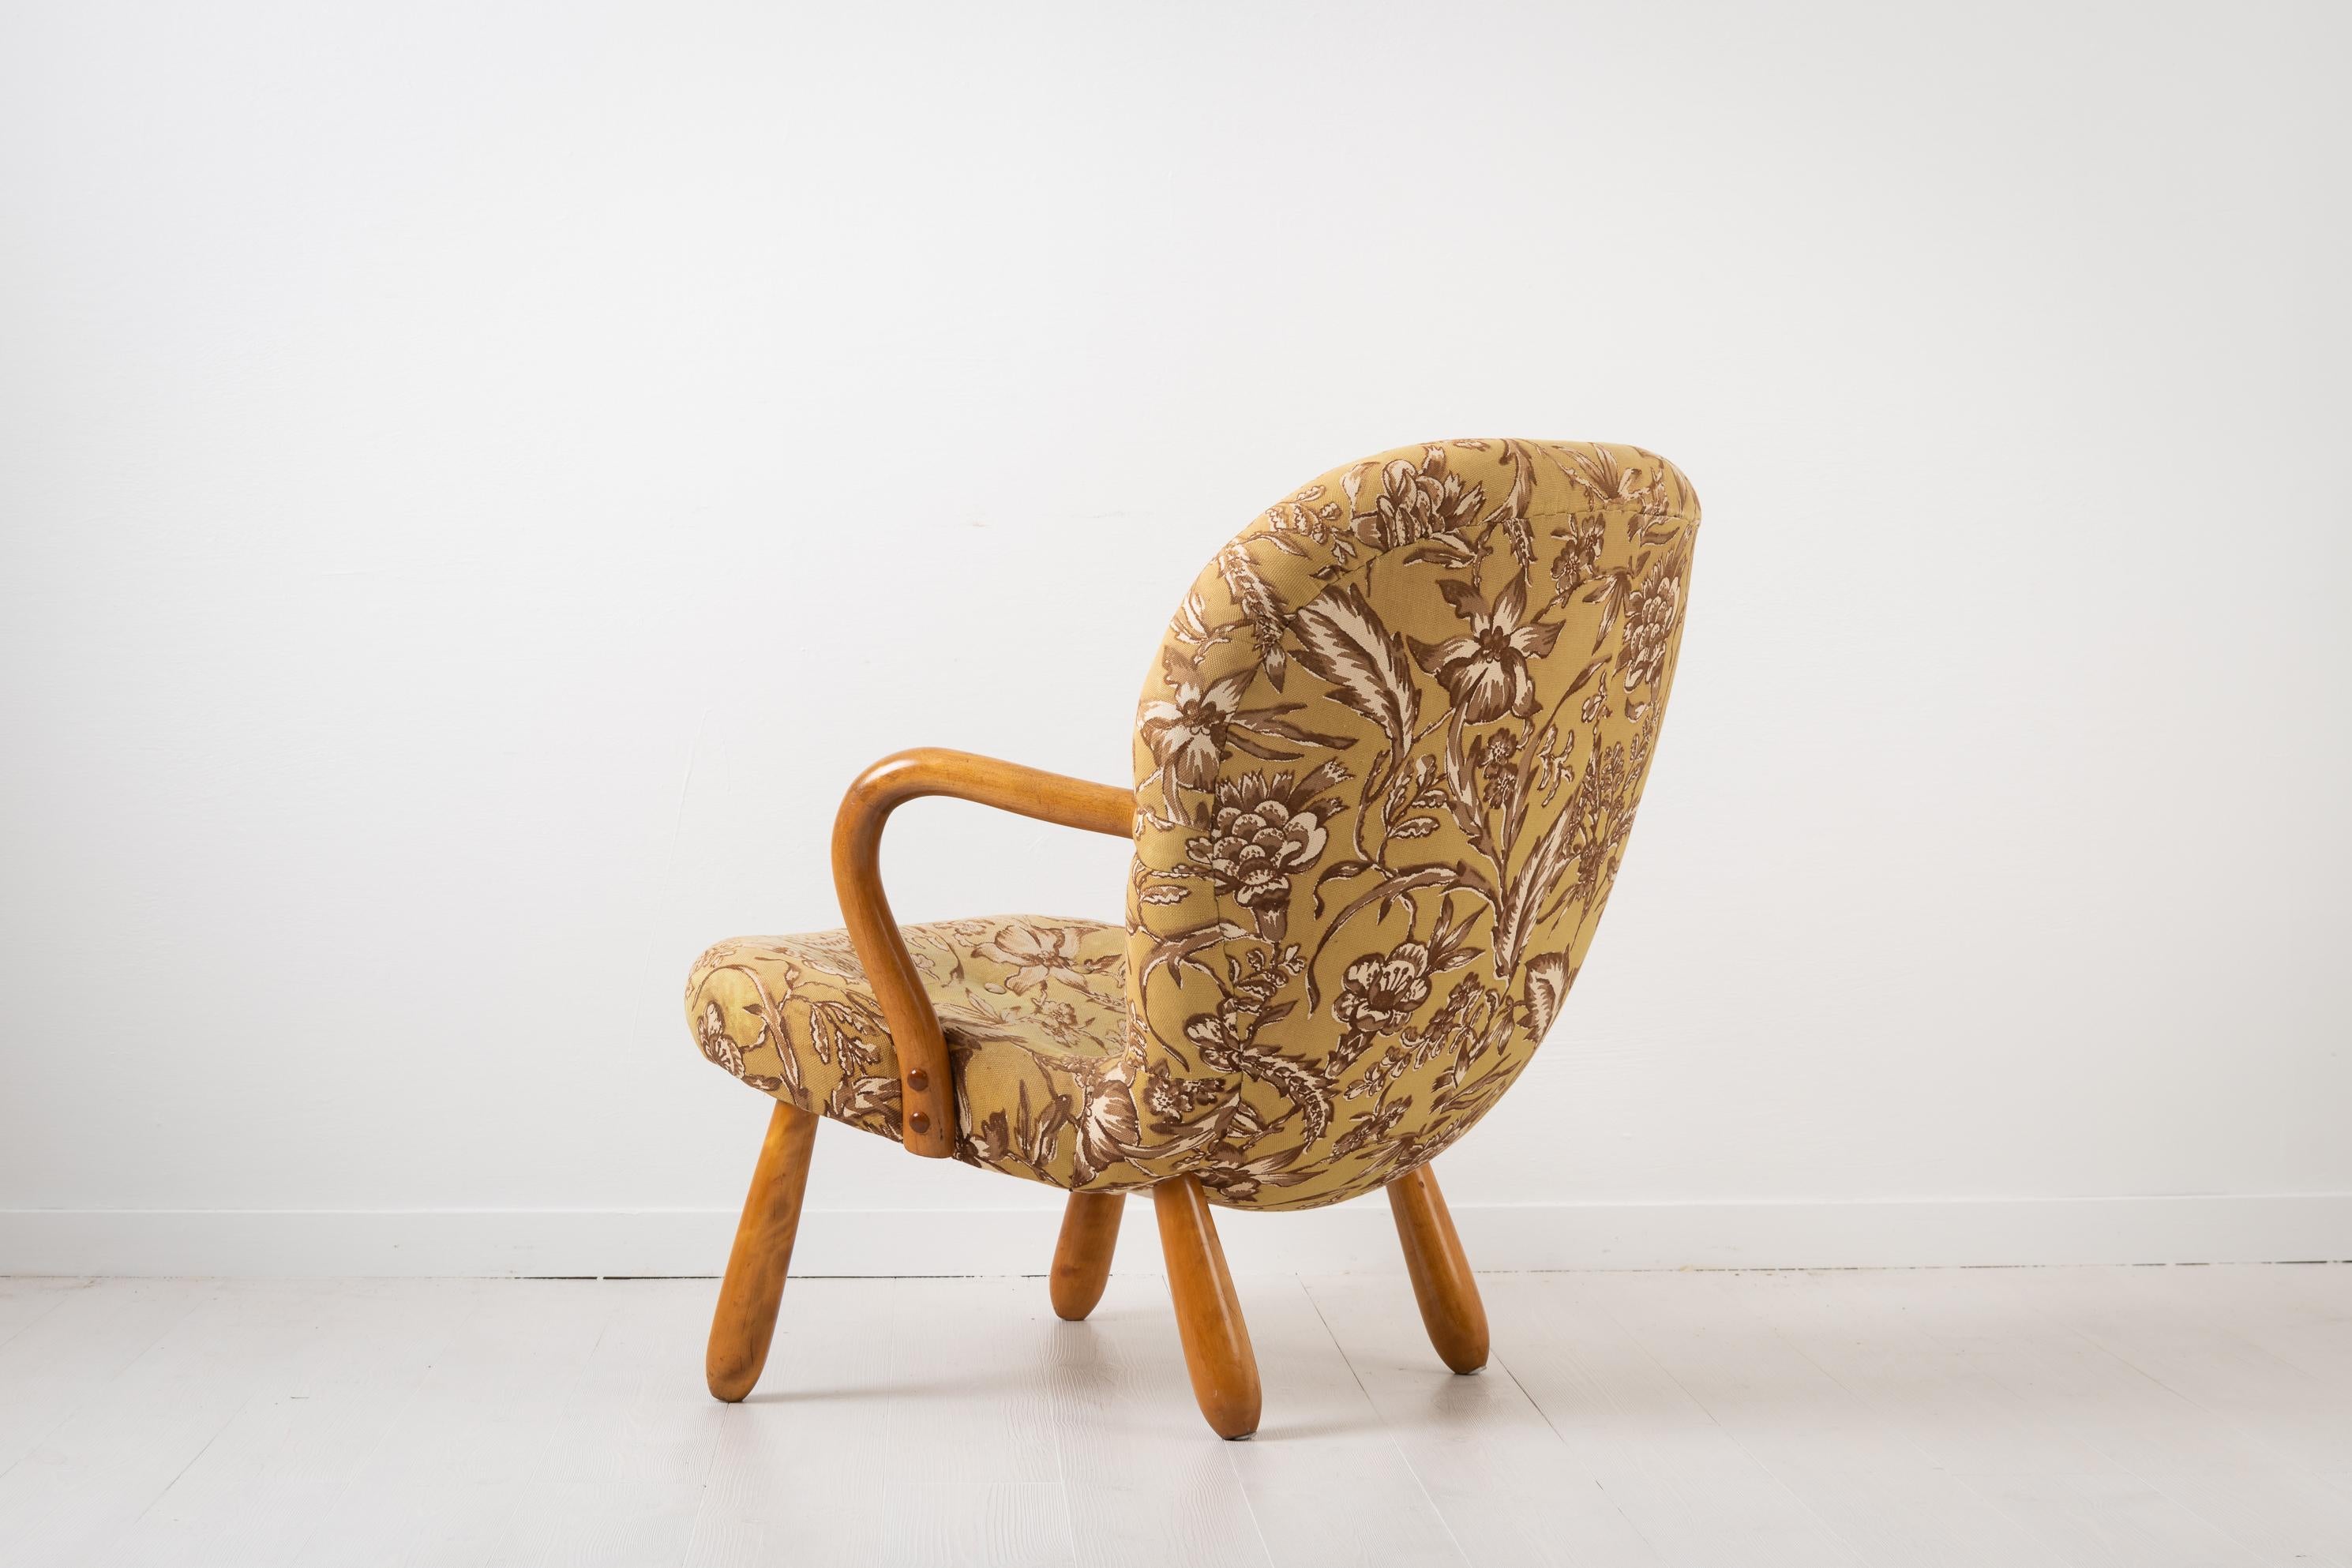 Scandinavian Modern Clam Chair Attributed to Philip Arctander 1